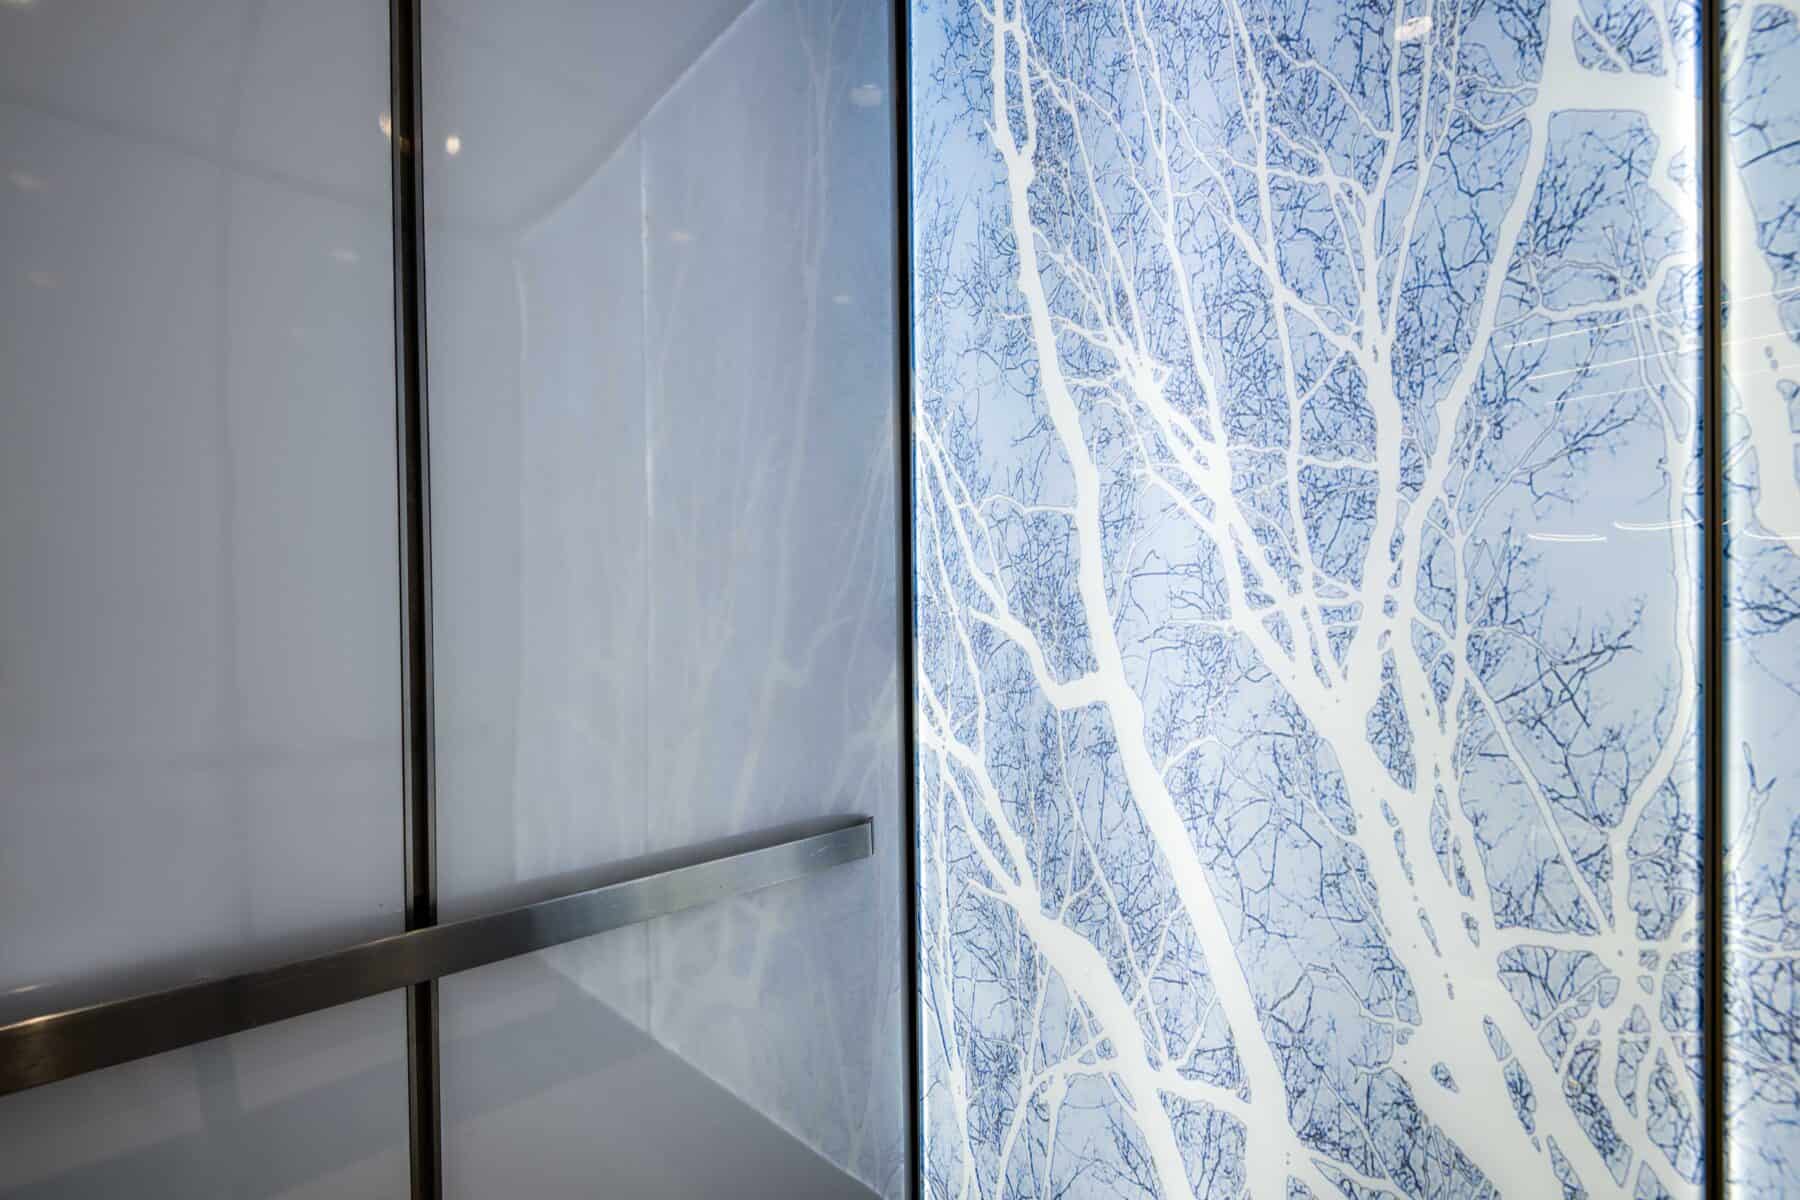 Custom Fabrication of Custom Fabrication of Architectural Backlit Custom Image Glass Panels for Elevators for Construction Specialty Projects by Commercial Builder & General Contractor Structural Enterprises